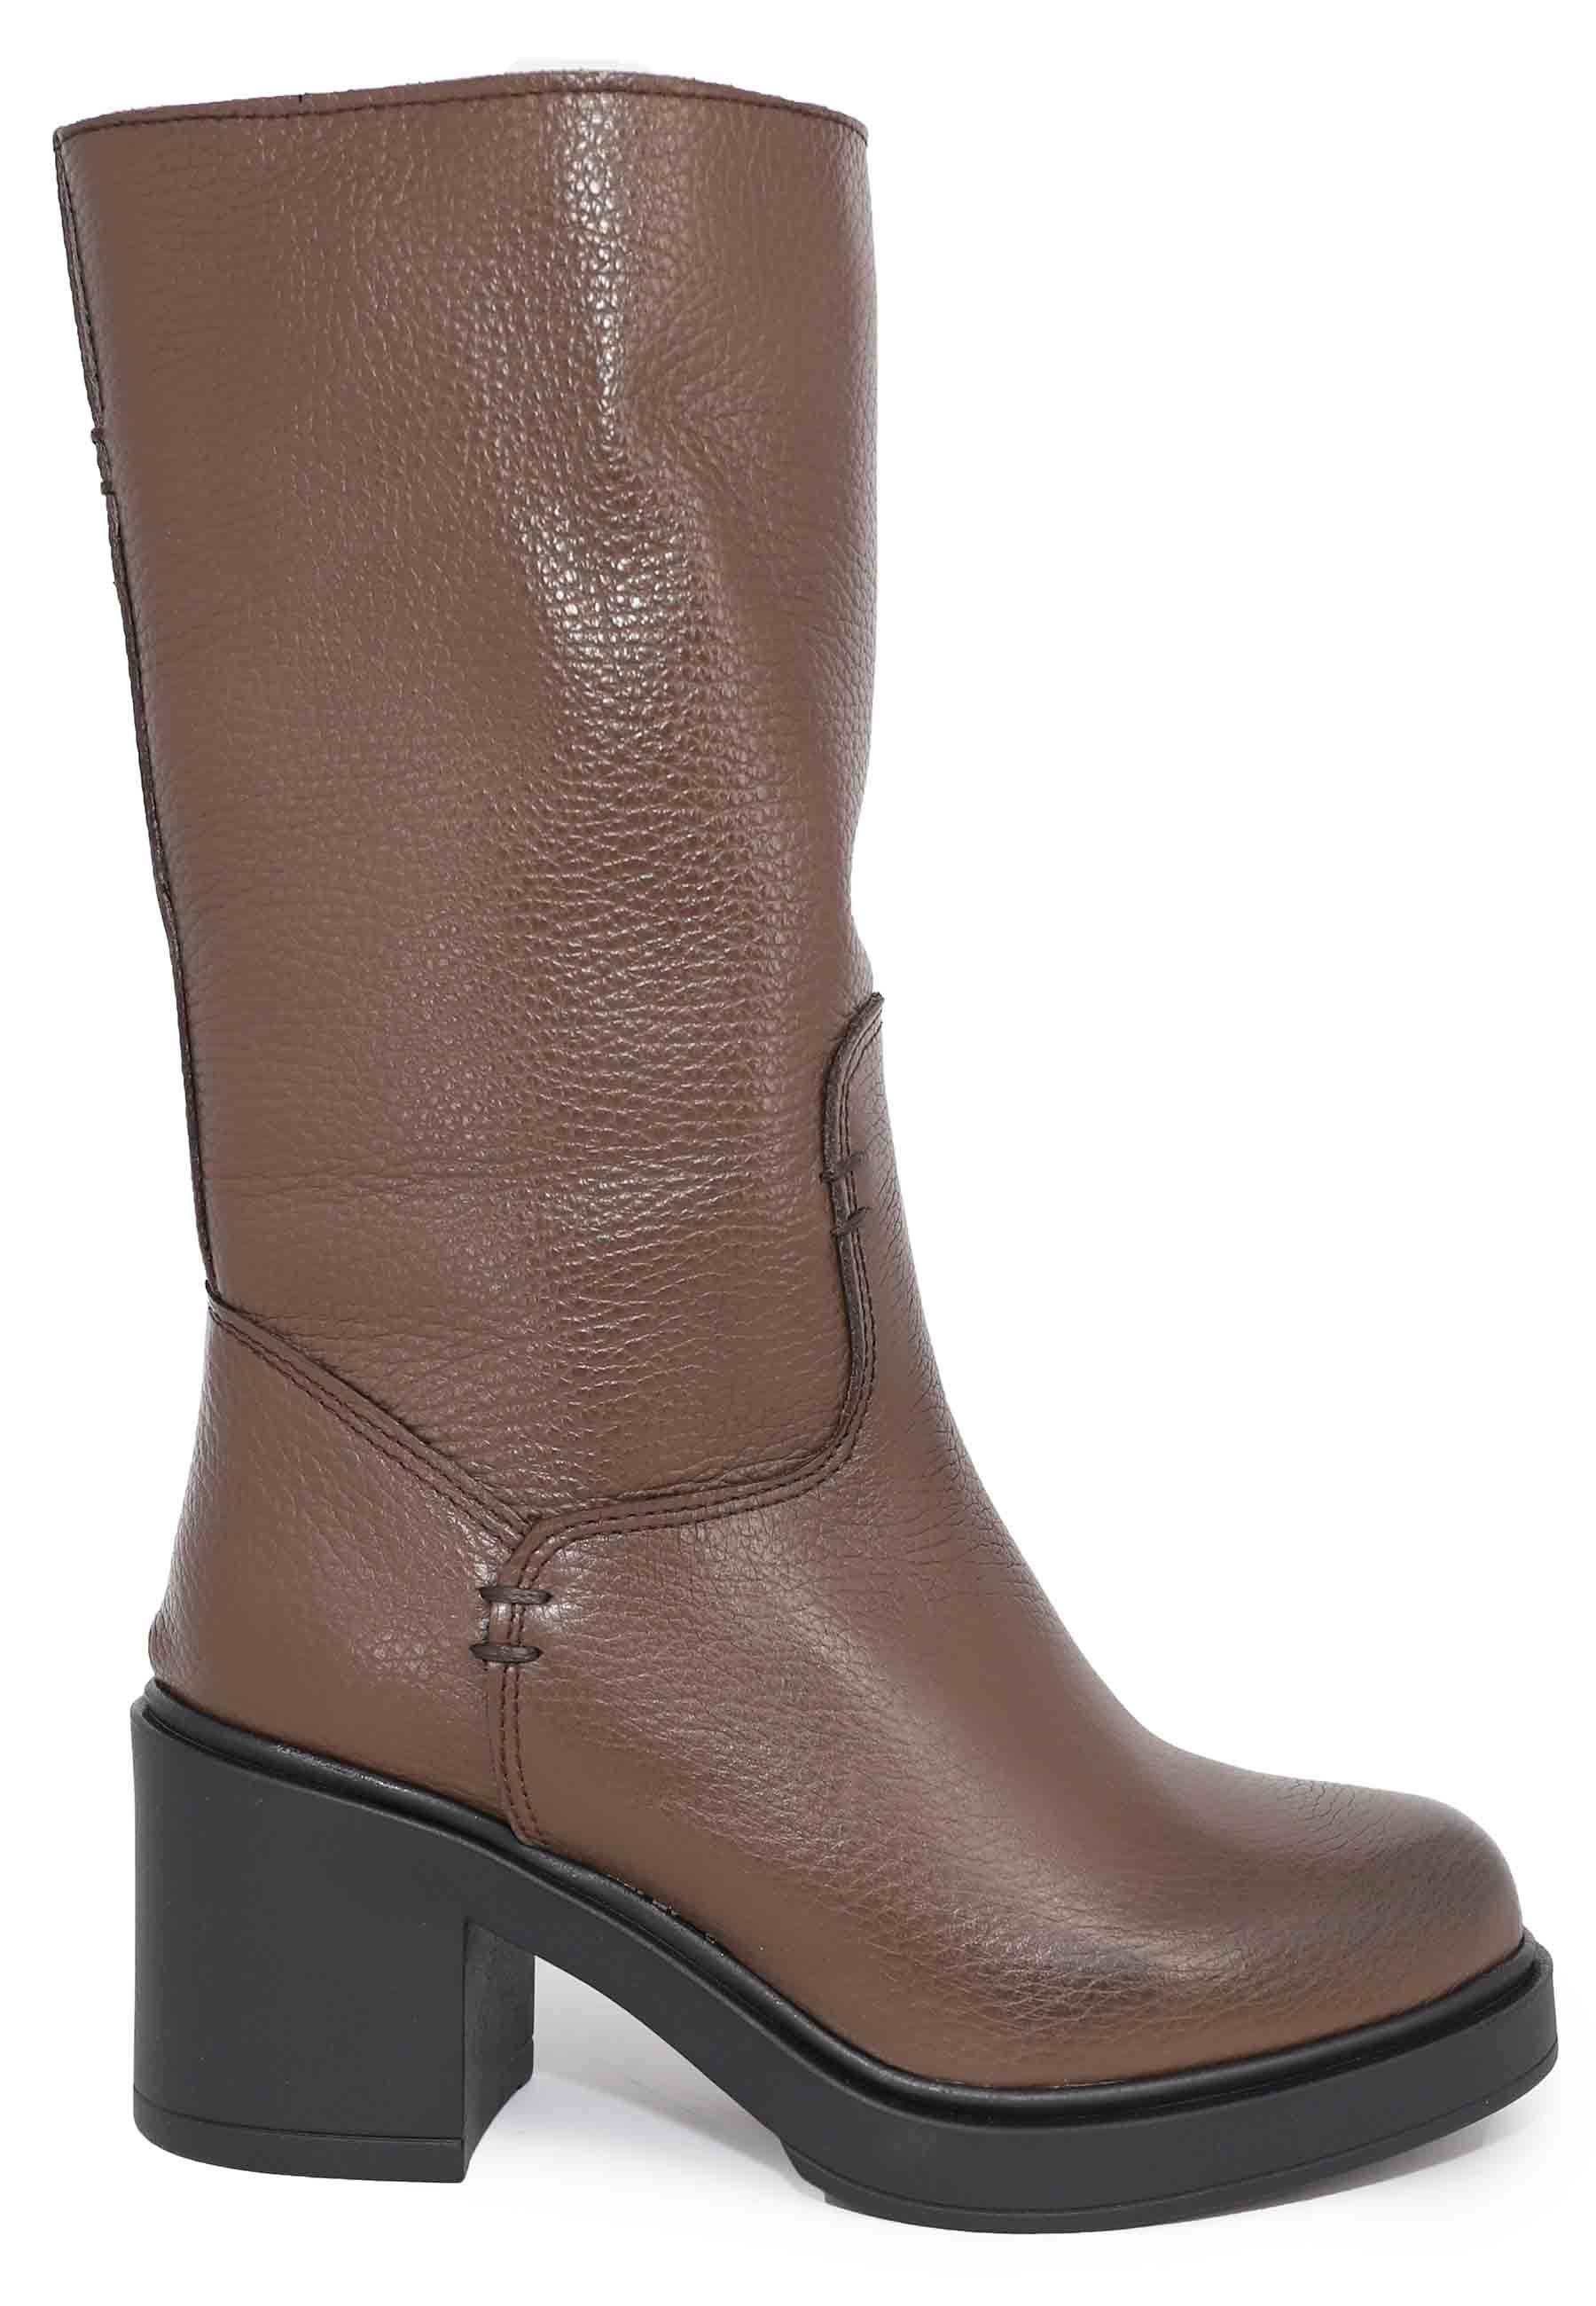 Women's mid-calf ankle boots in brown grained leather